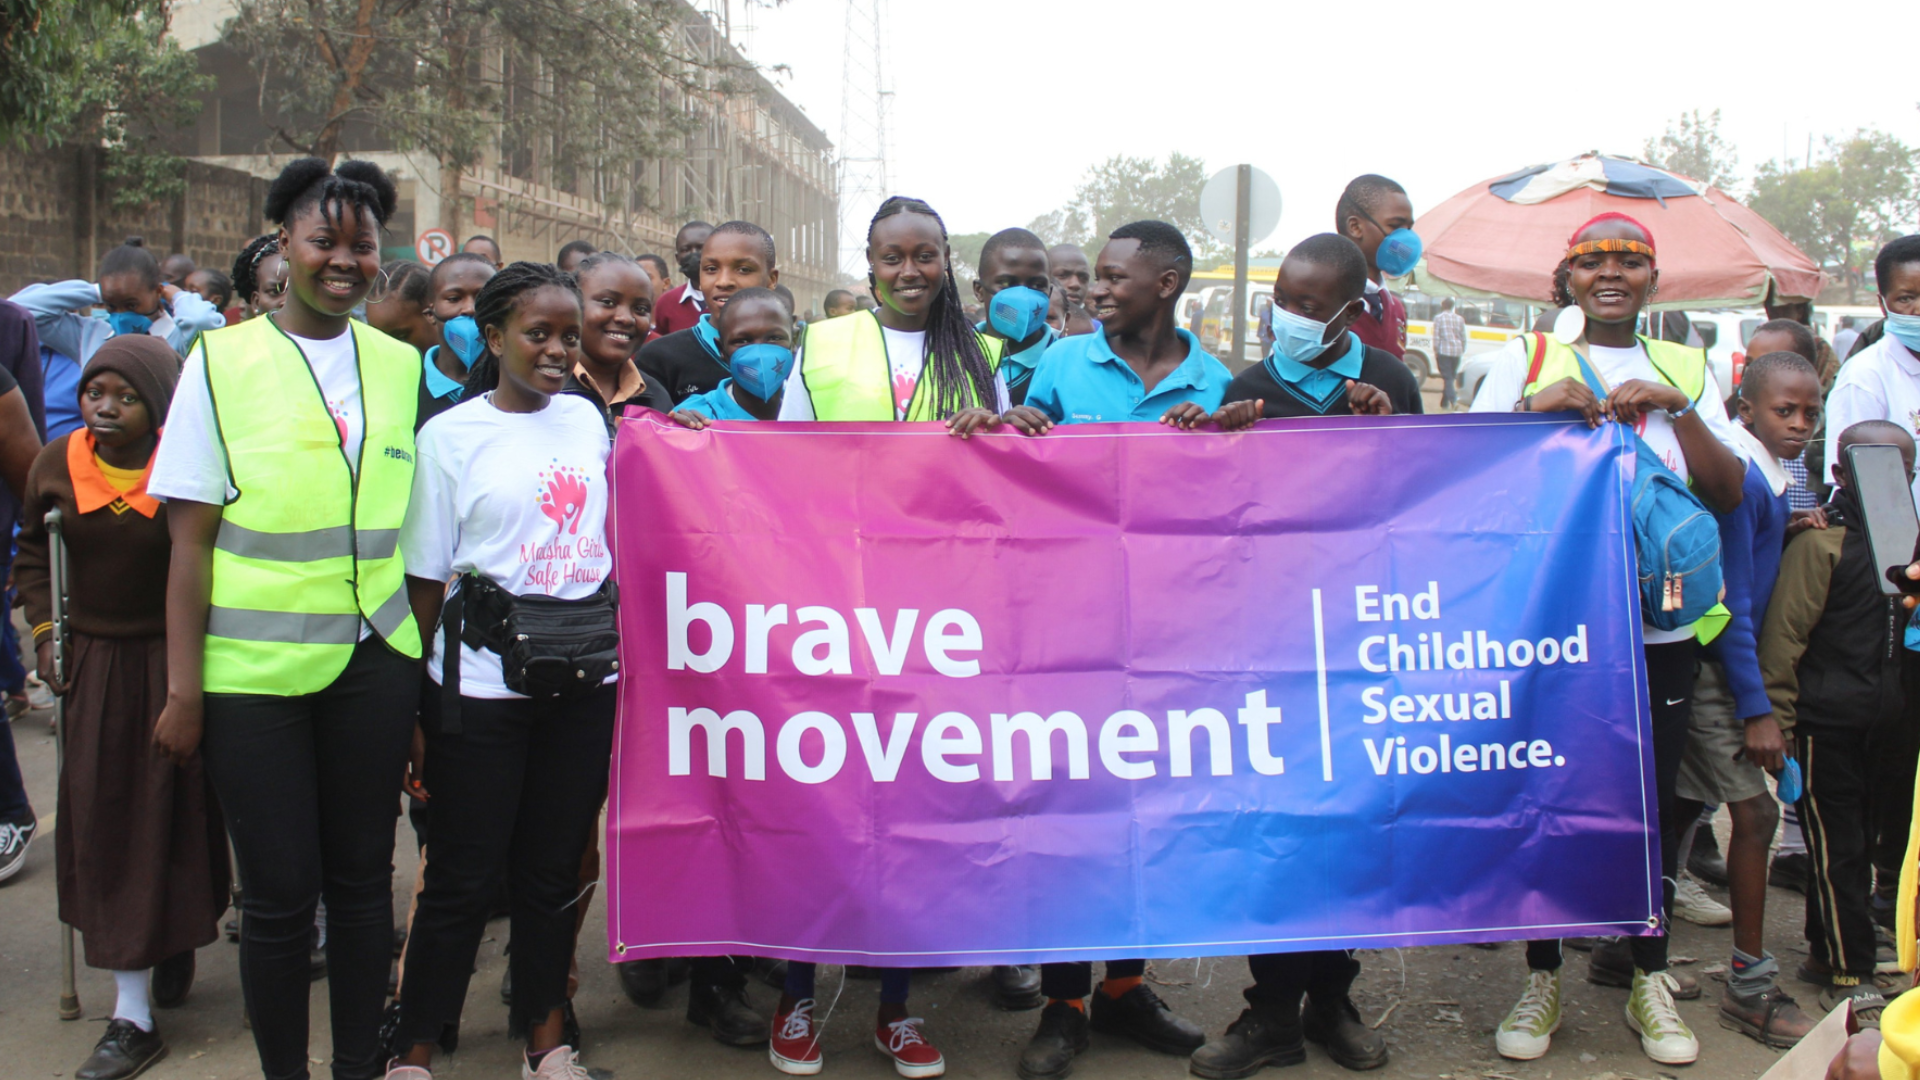 Members of Brave Movement Kenya hold a banner that says "Brave Movement to End Childhood Sexual Violence."